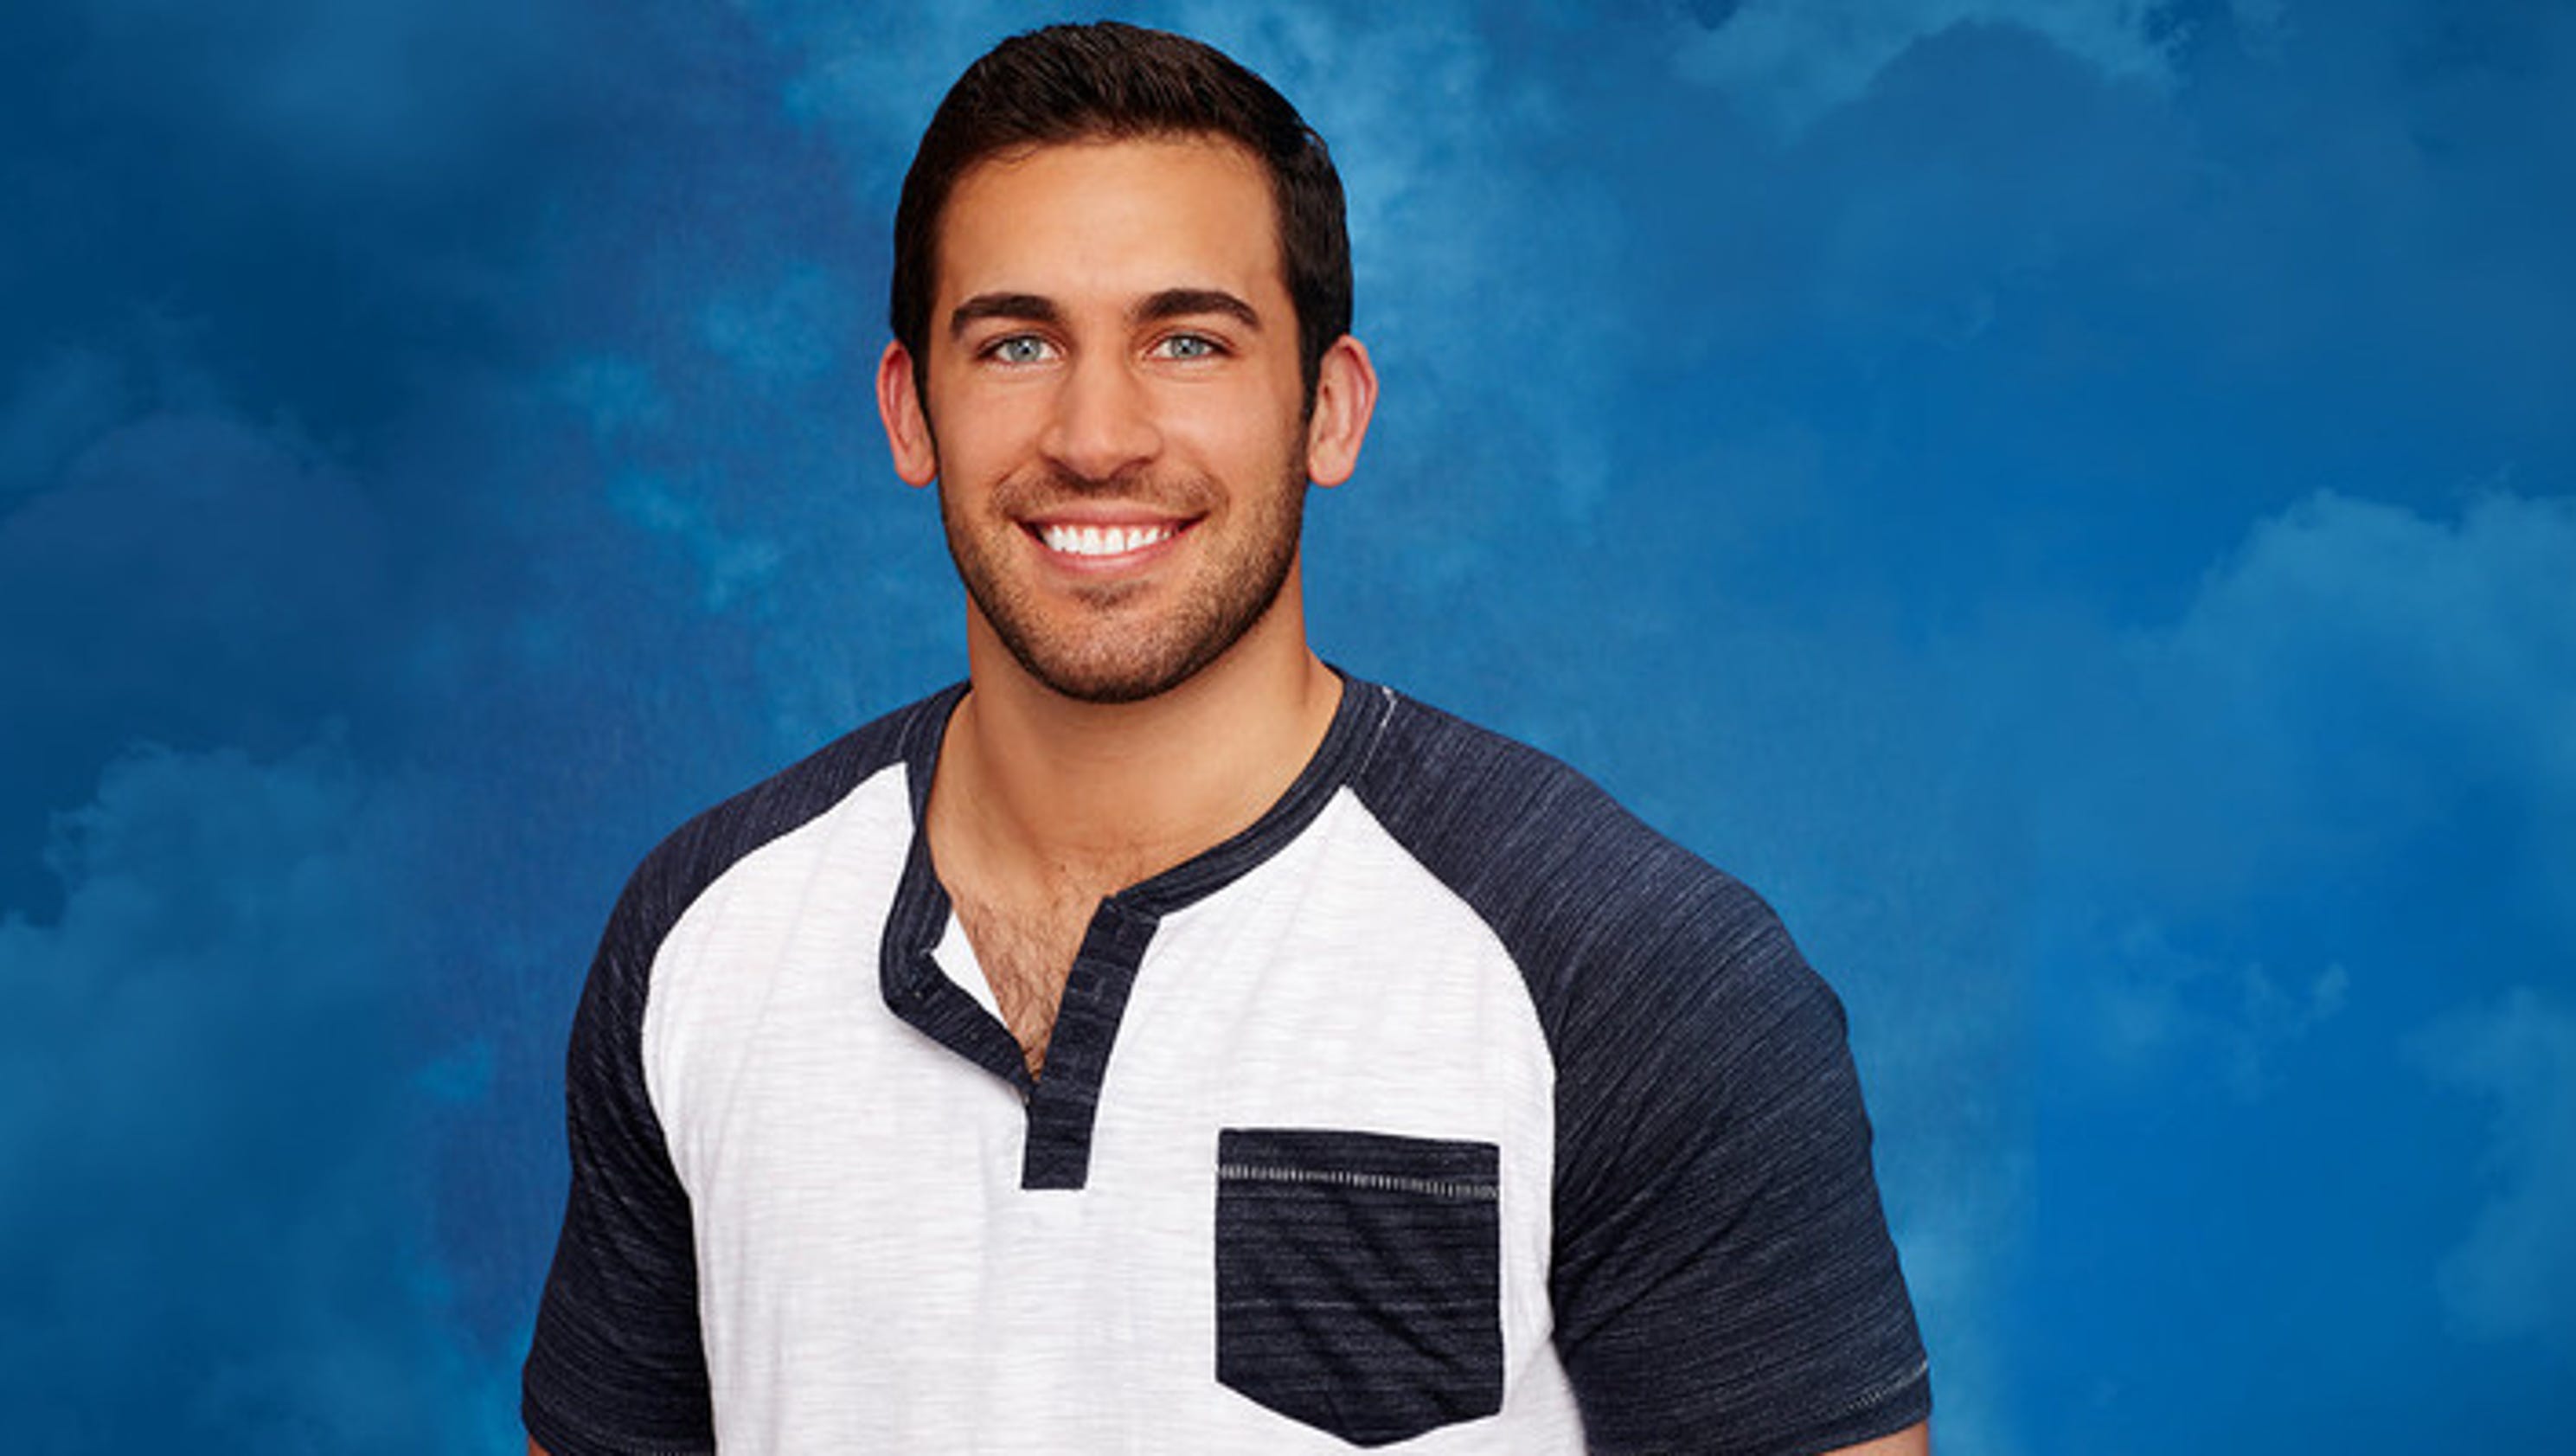 Meet the Iowan who will appear on 'The Bachelorette'